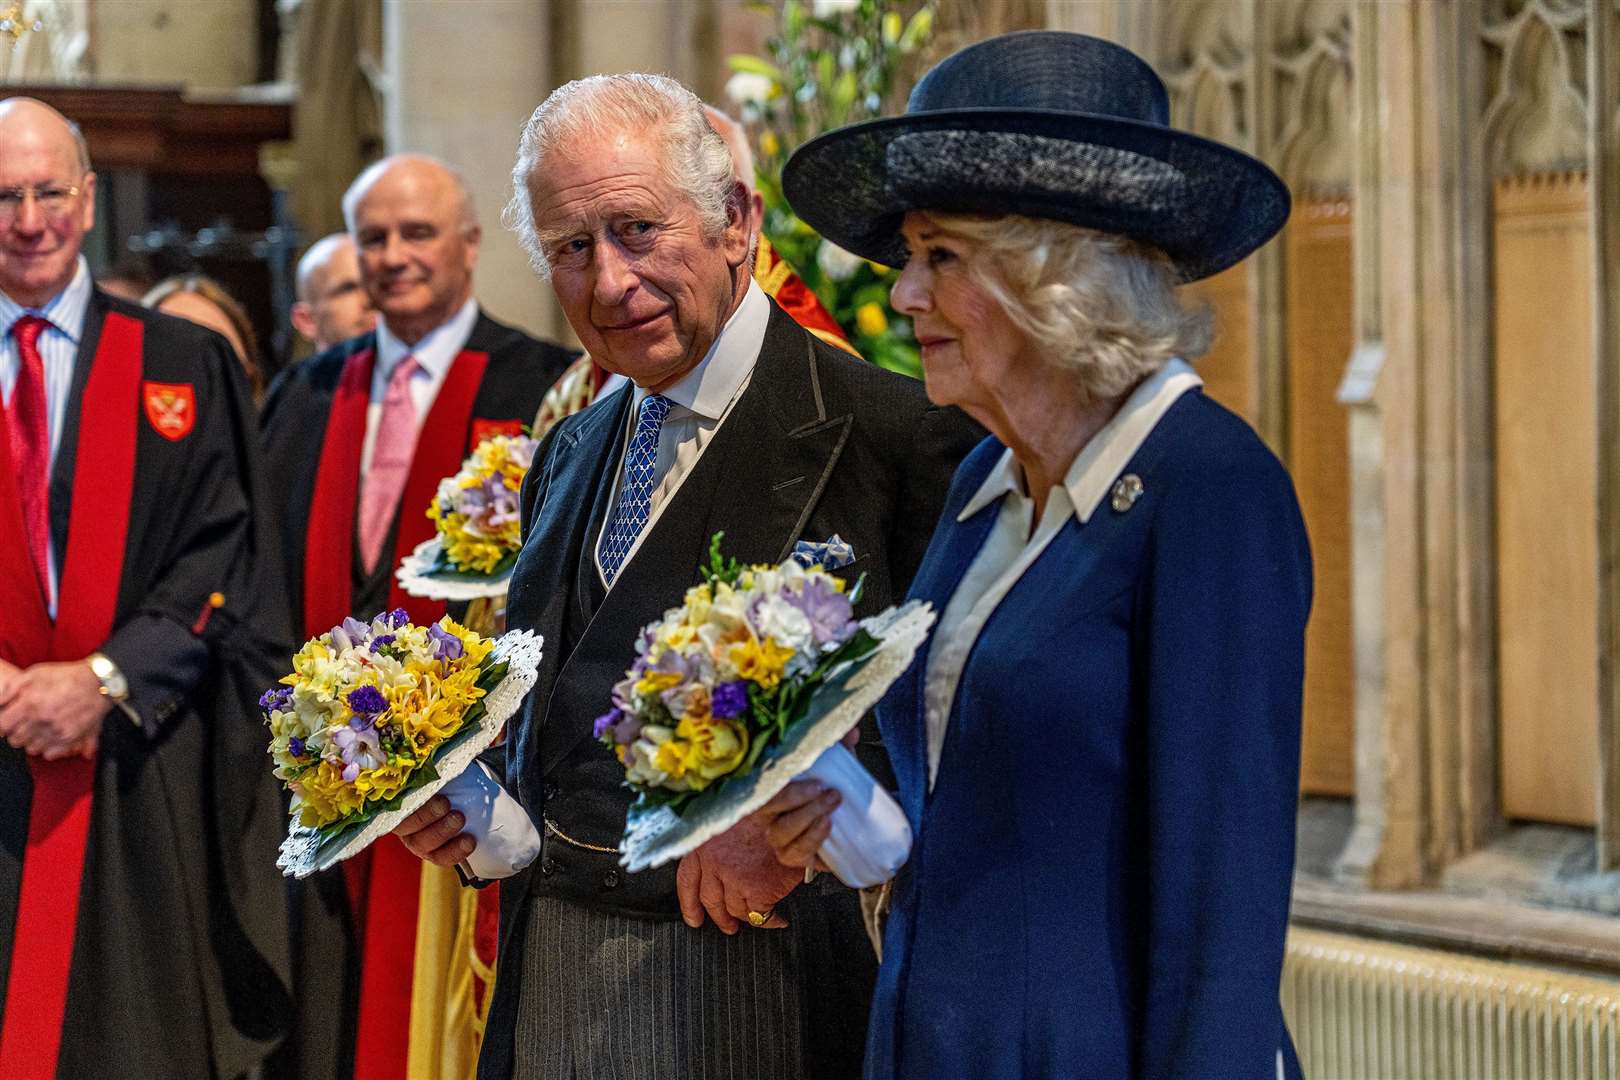 The King and Camilla will be crowned in Westminster Abbey on Saturday May 6 (Charlotte Graham/Daily Telegraph/PA)